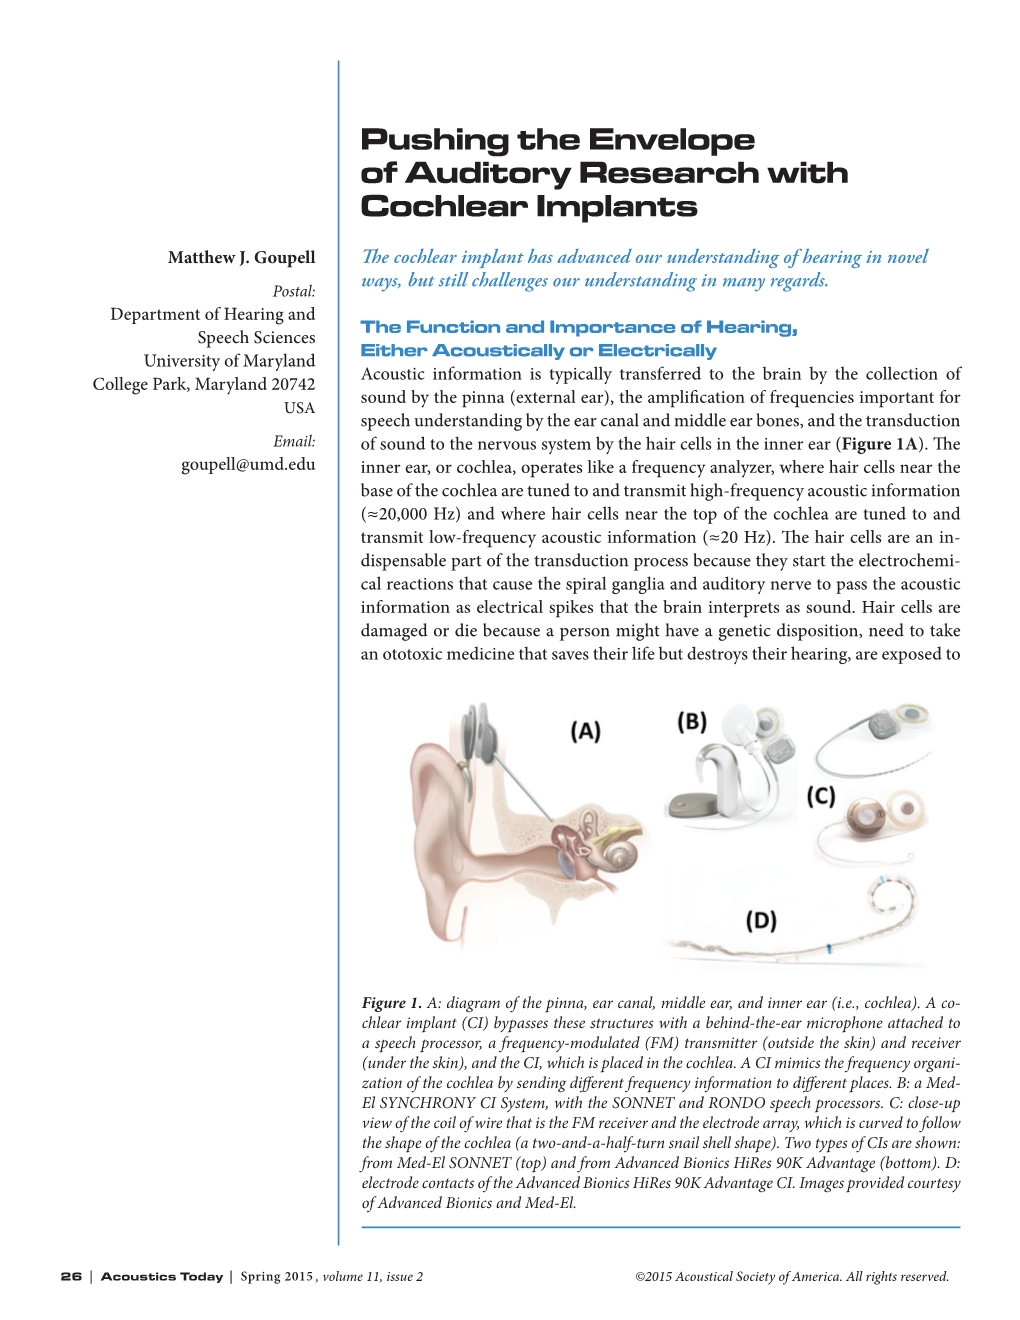 Pushing the Envelope of Auditory Research with Cochlear Implants